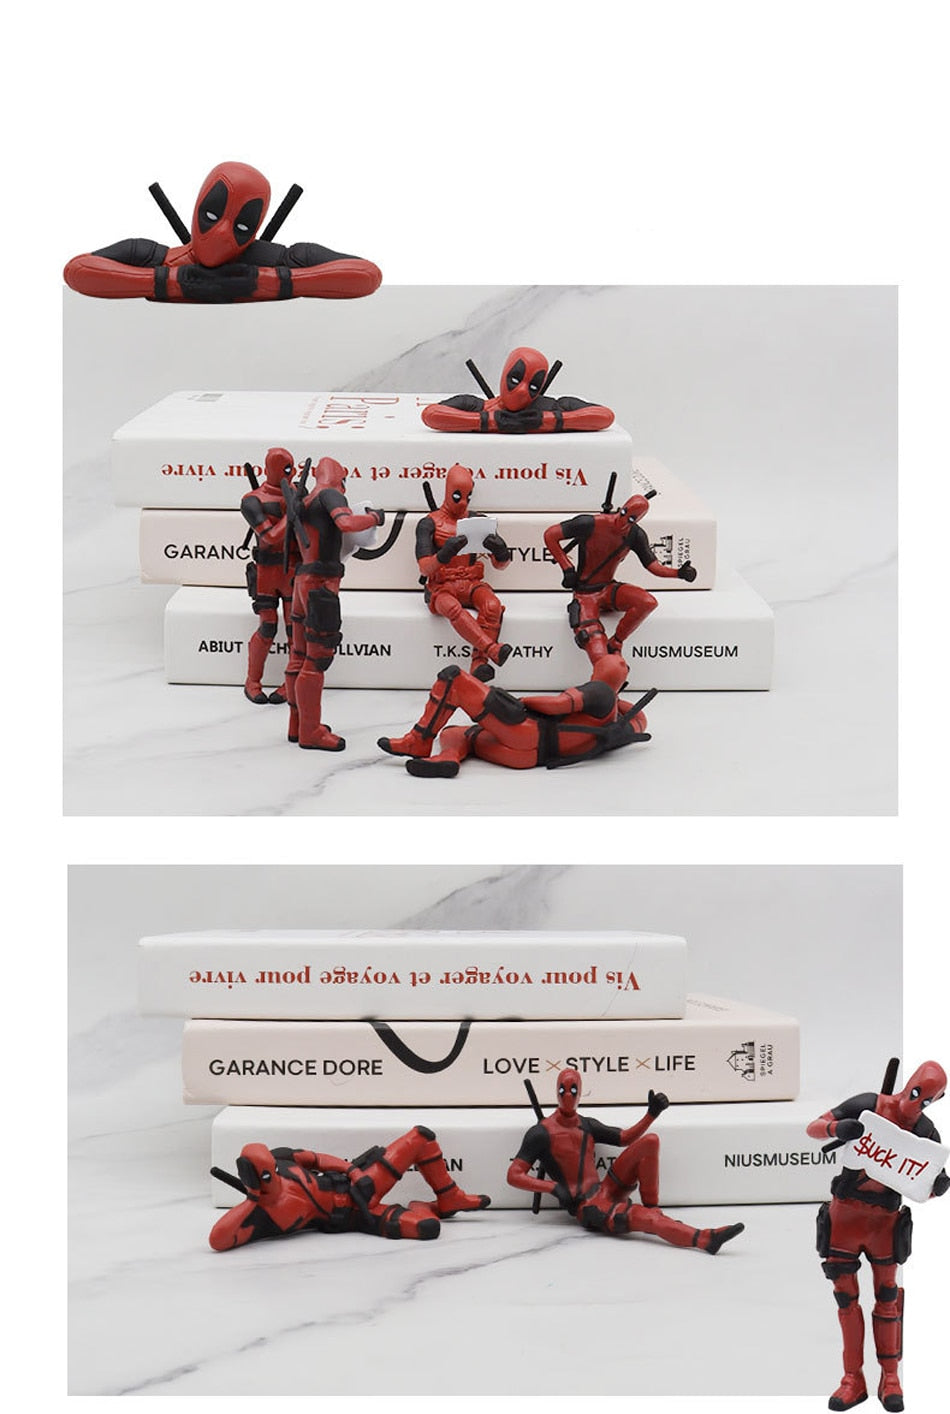 Anime Deadpool 2 Action Figure Sitting lying Posture Model Anime X-Men Mini Doll Decoration Collection Figurine Gifts